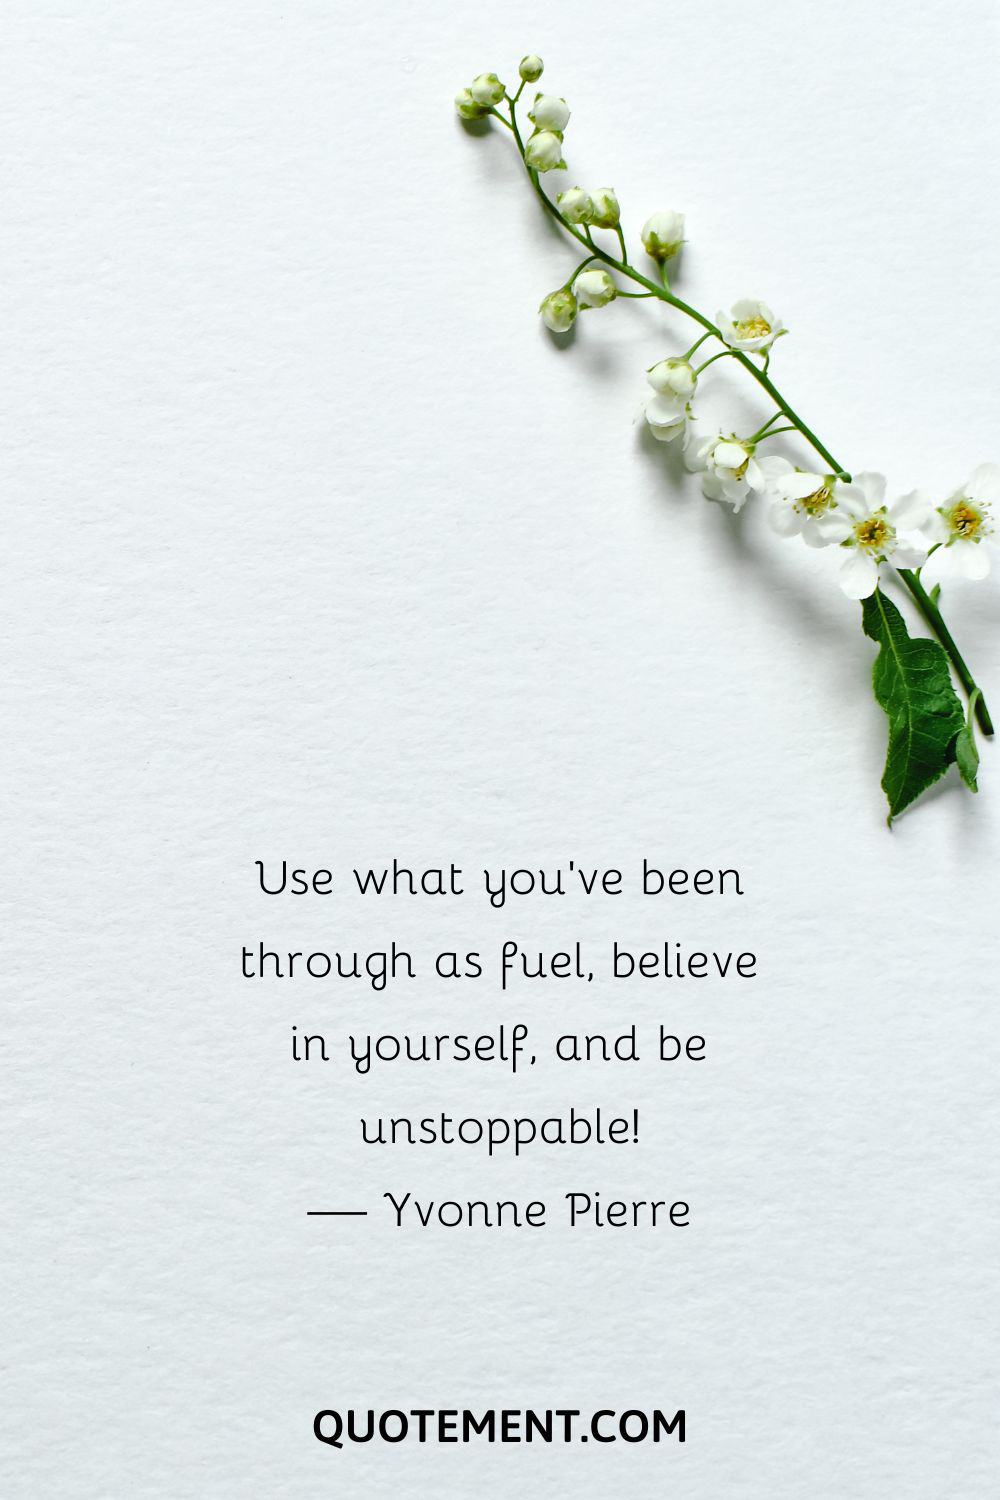 Use what you've been through as fuel, believe in yourself, and be unstoppable